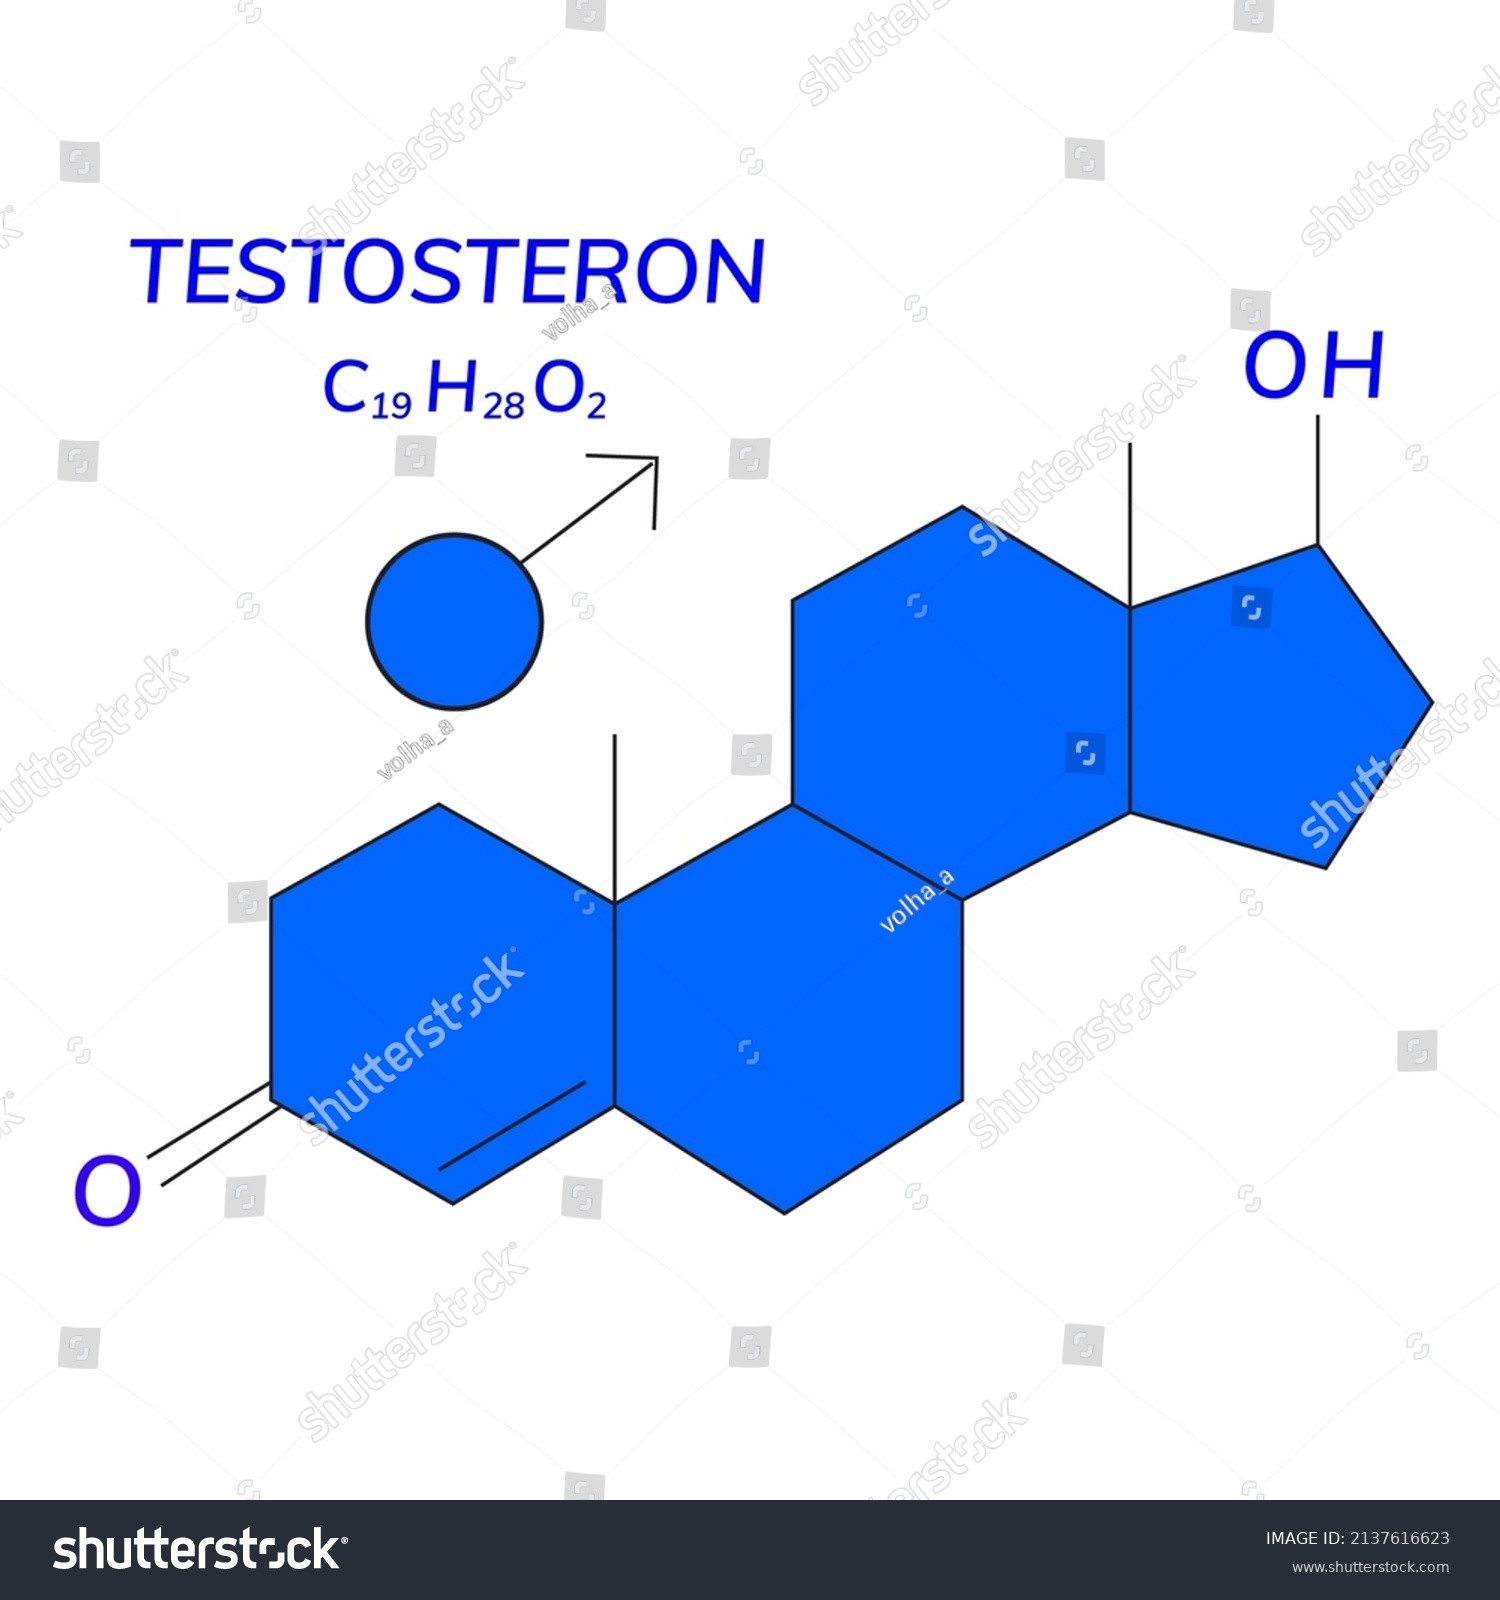 Testosterone Chemical Formula Male Sex Hormone Stock Vector Royalty Free 2137616623 Shutterstock